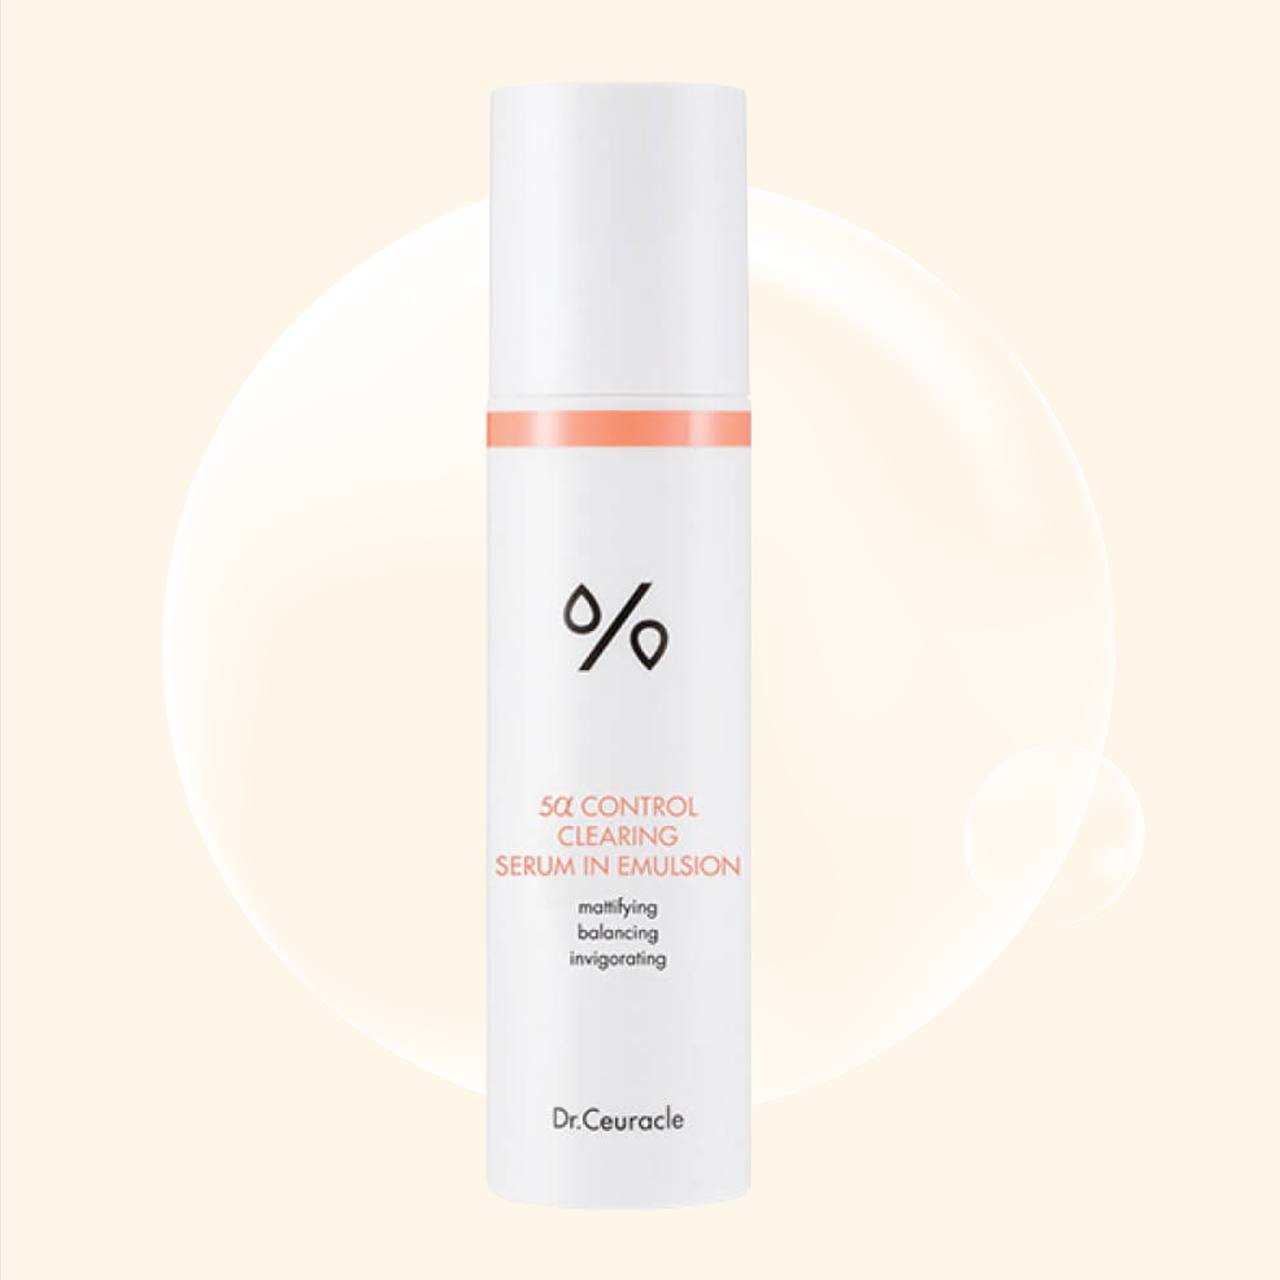 Dr.Ceuracle 5a Control Clearing Serum in Emulsion 100 мл